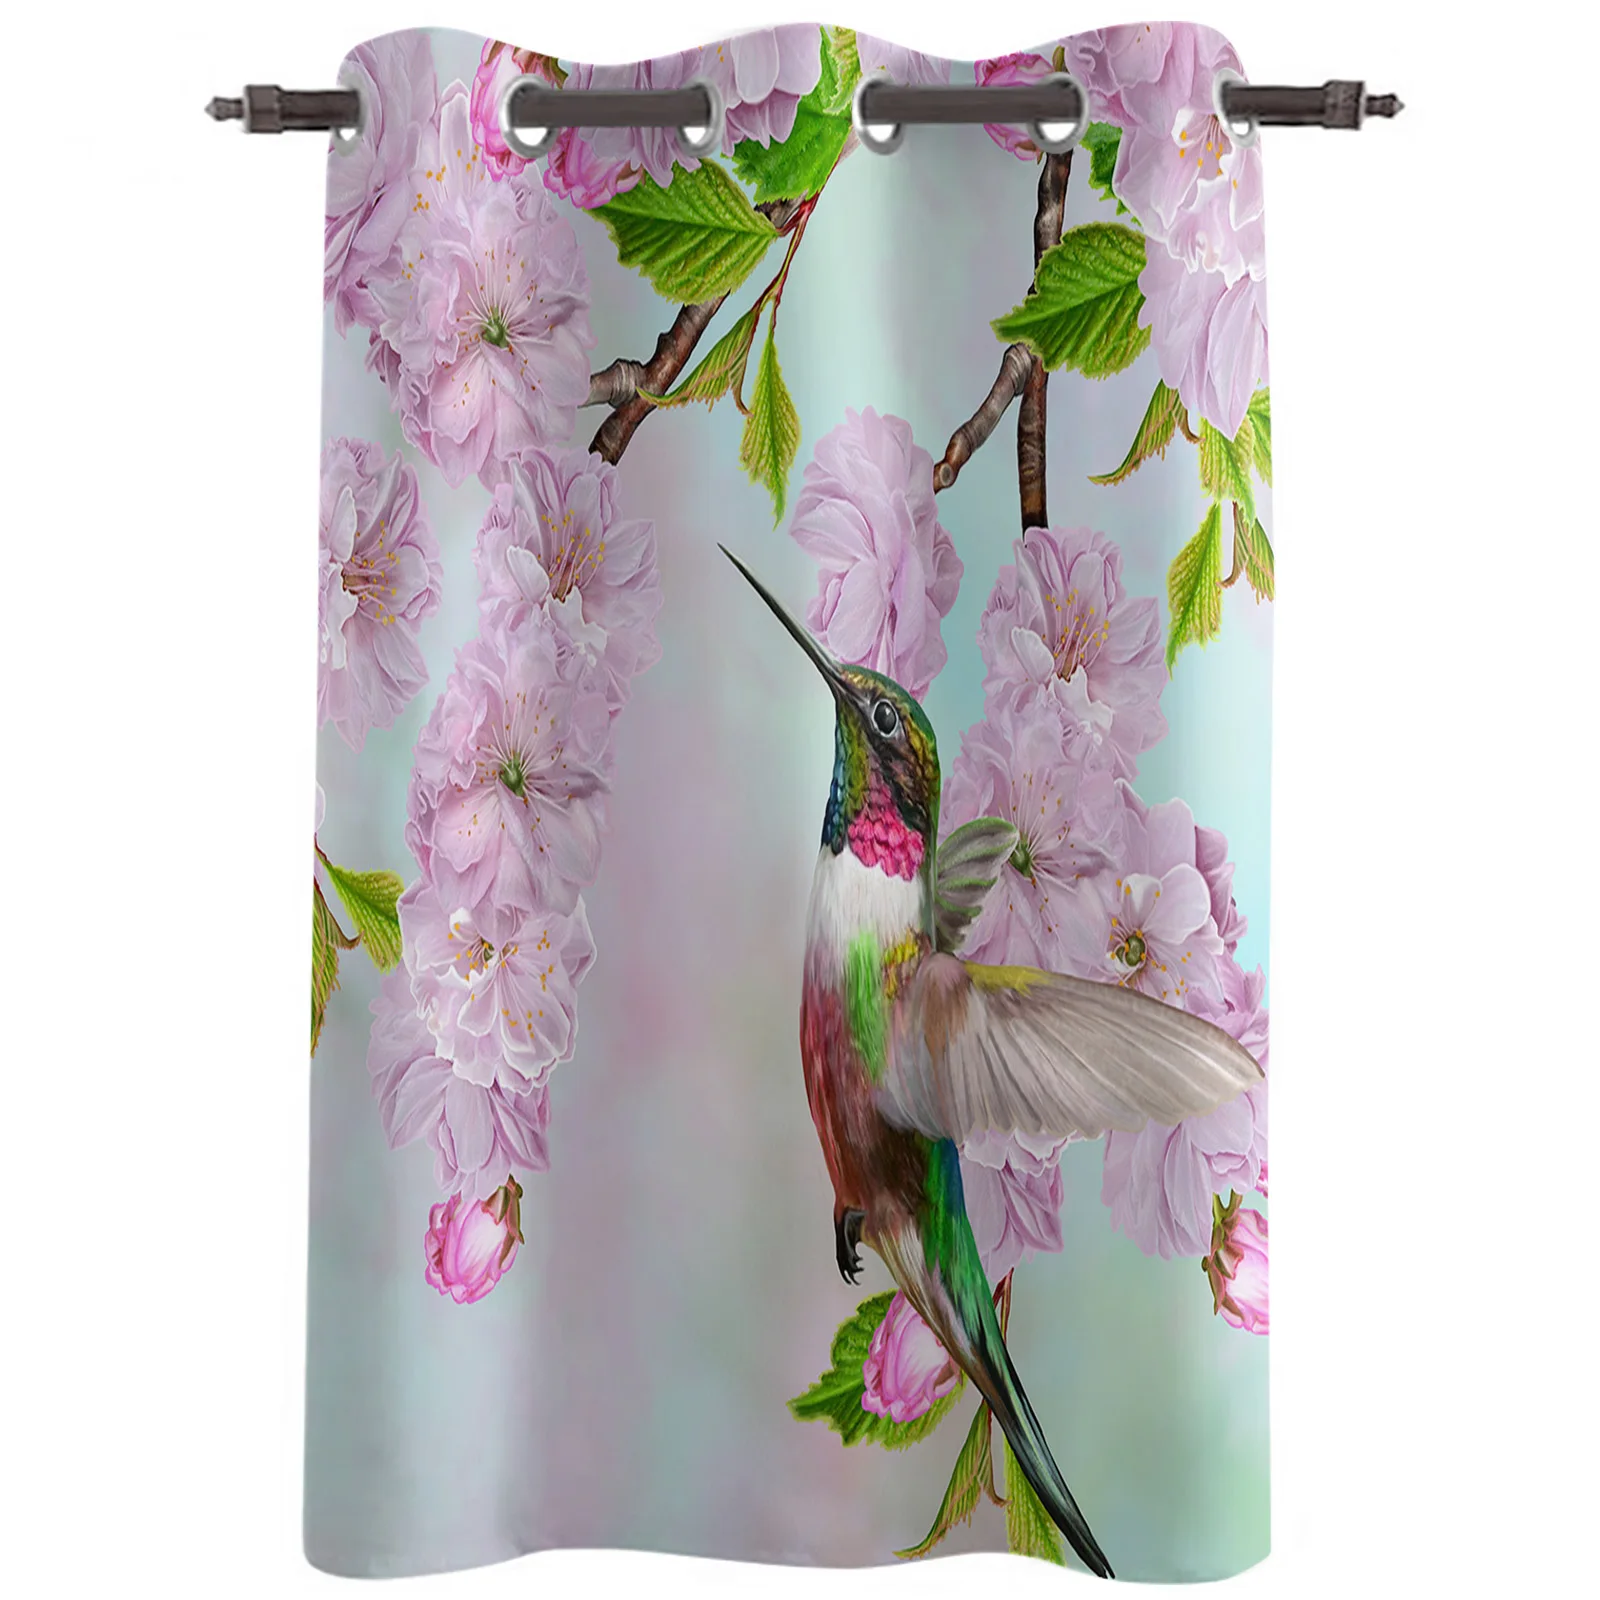 Hummingbird and Tropical Leaves Oil Painting Kitchen Curtains Window Drapes New 